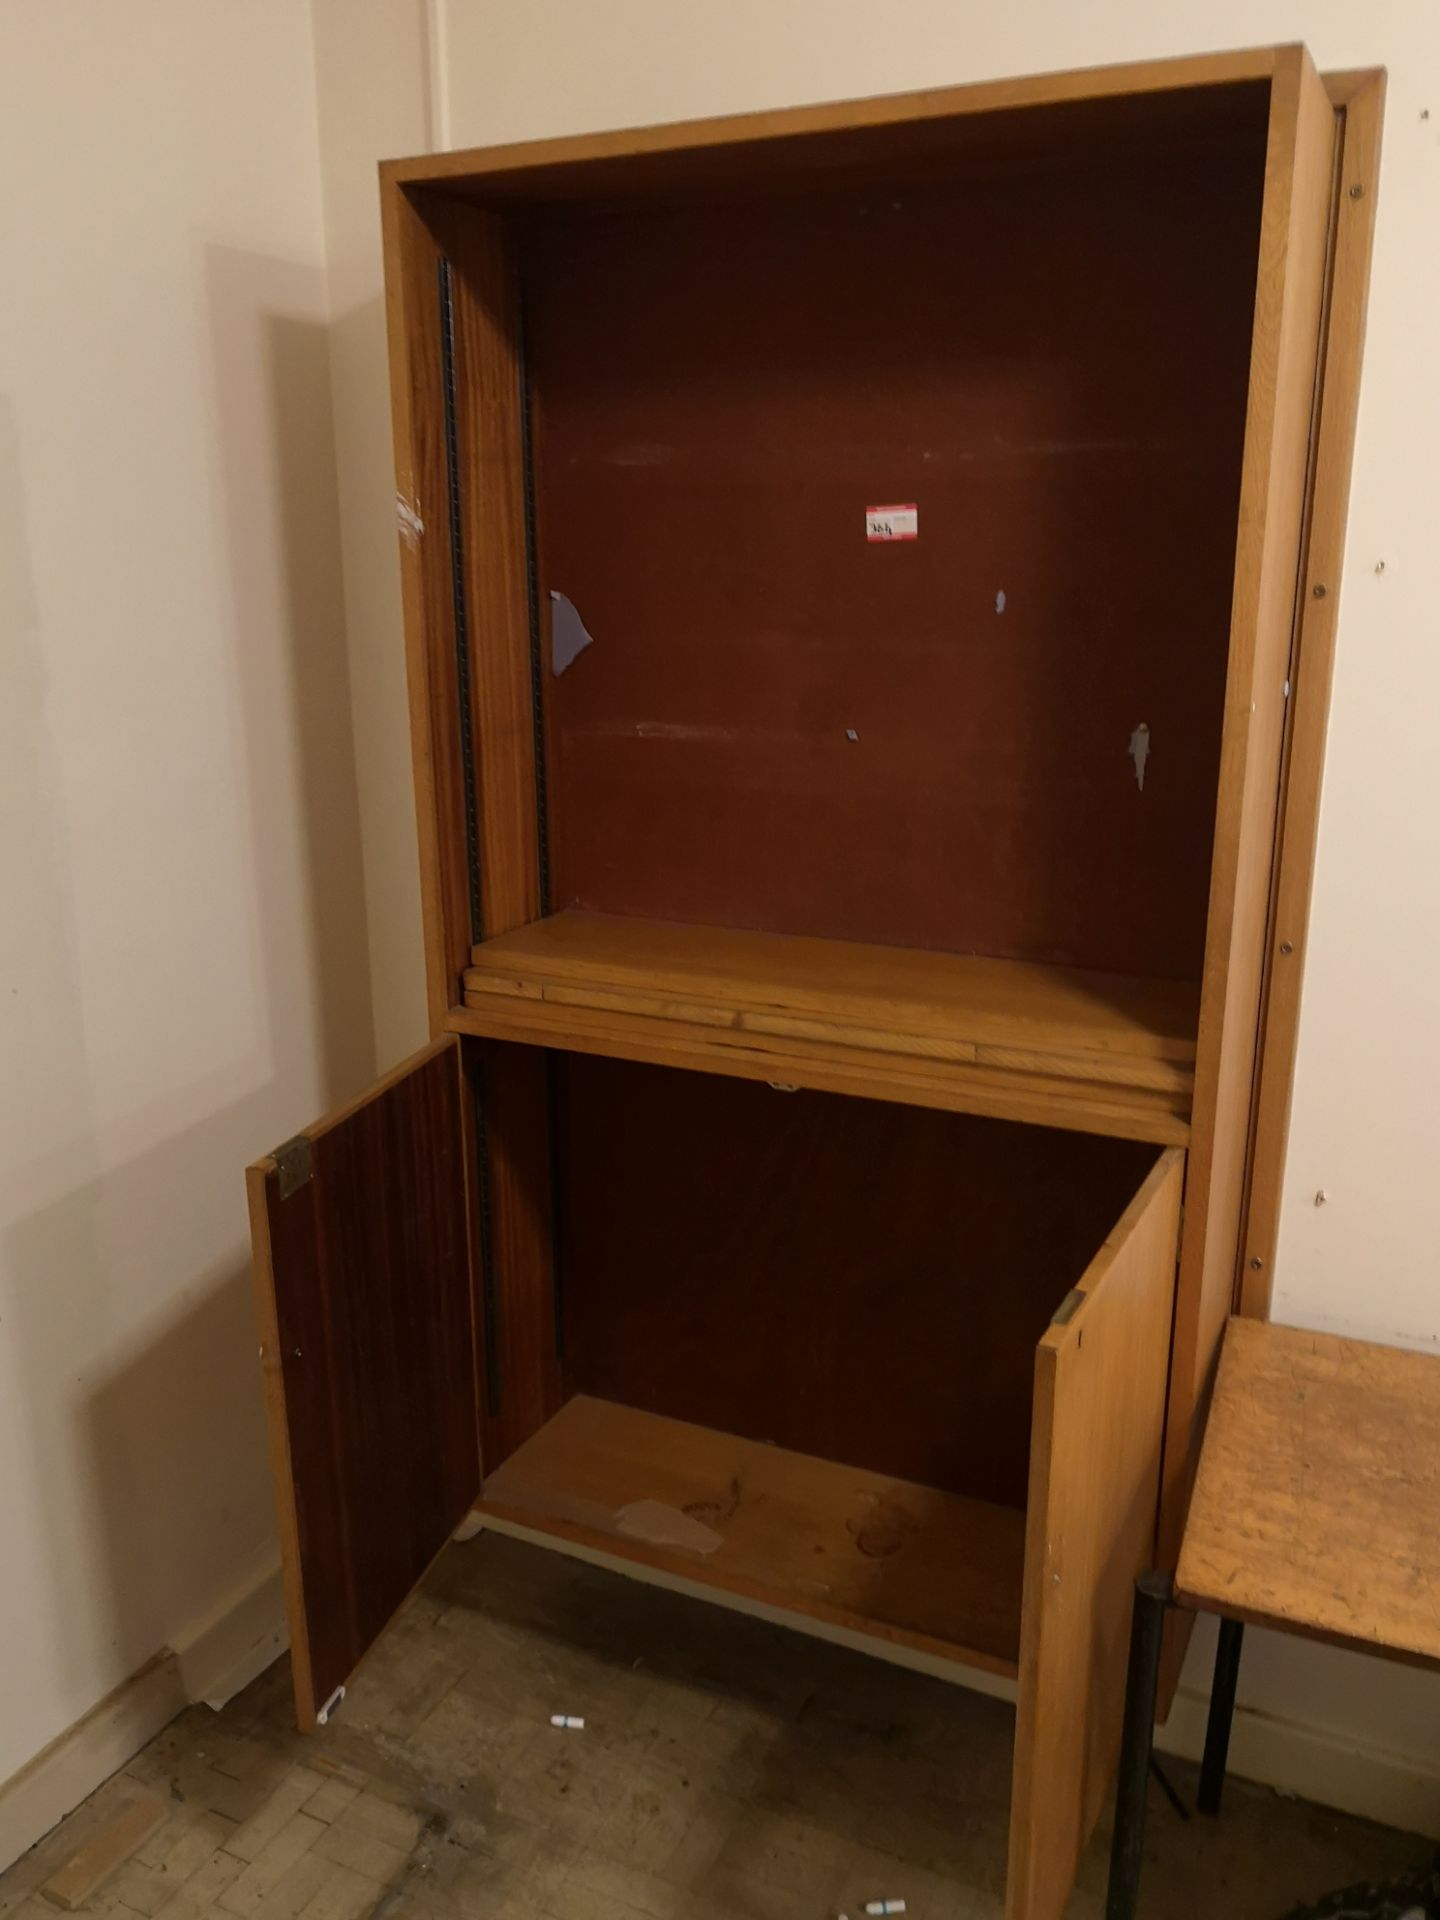 Vintage tall wooden cabinet with doors - Image 2 of 2